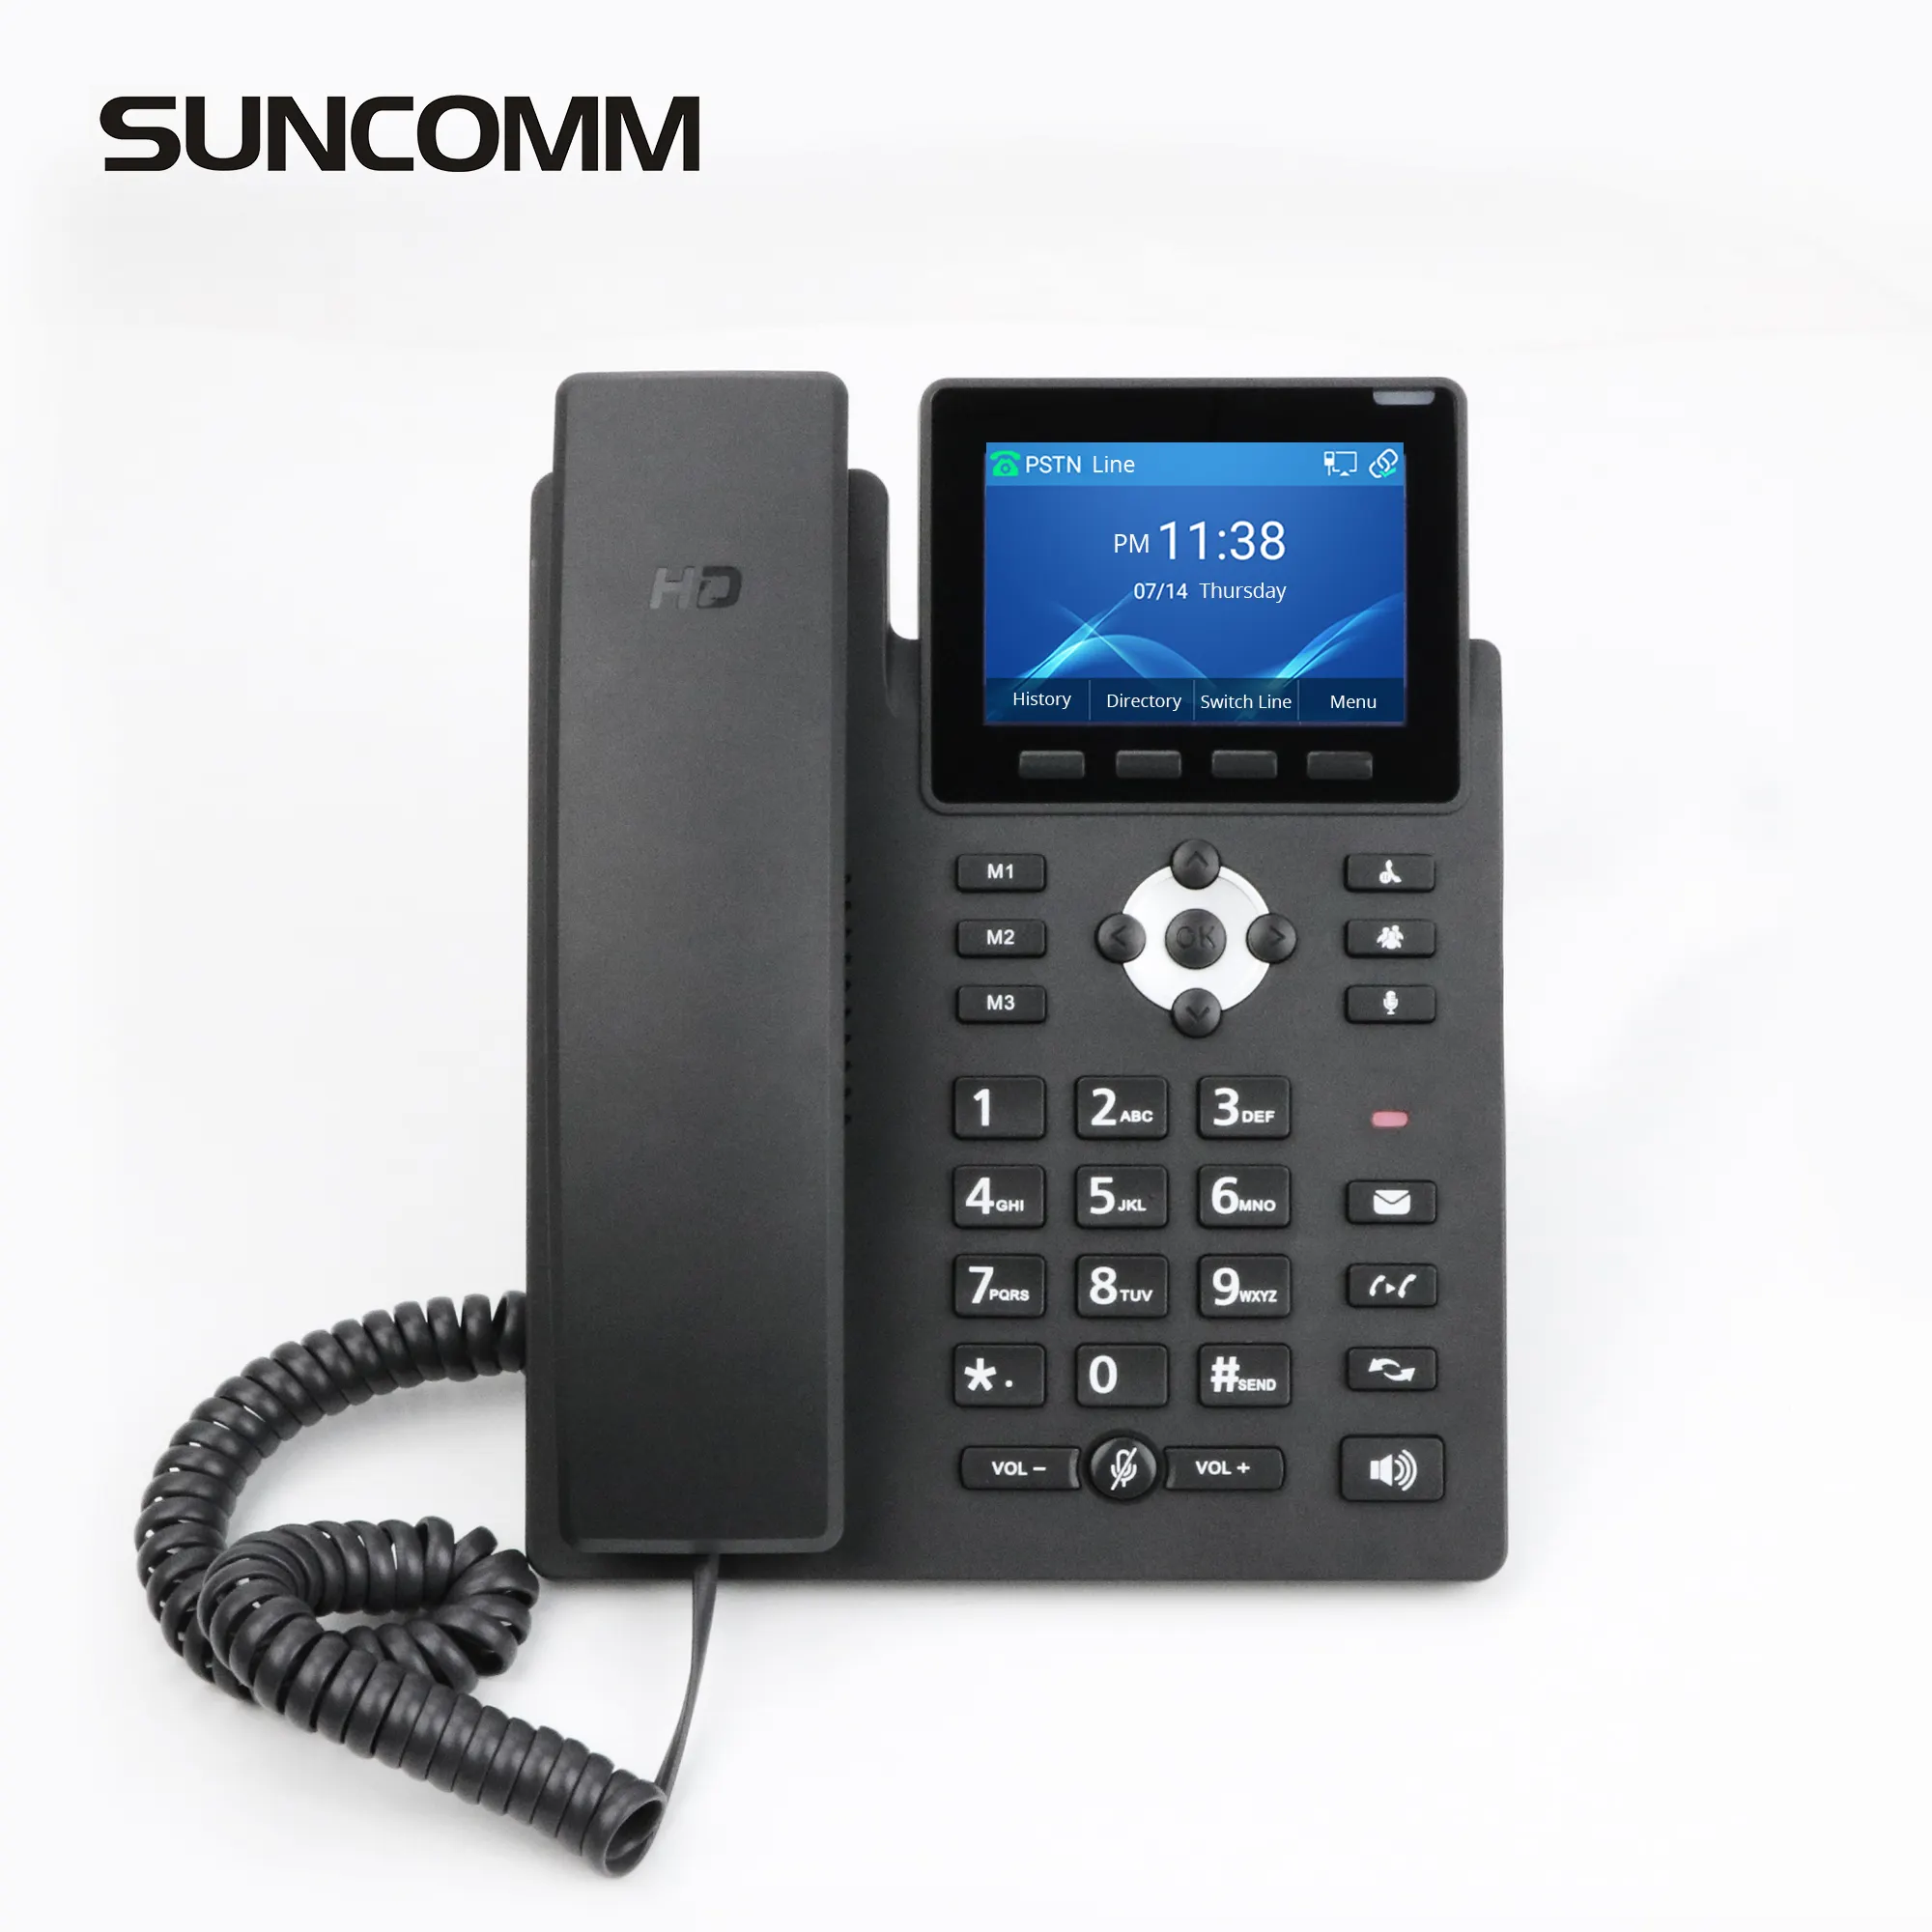 Hot selling SUNCOMM SC135 Voip phone systems POE 3.5 Inch Color Screen Android WiFi 2.4G IP Phone for enterprise